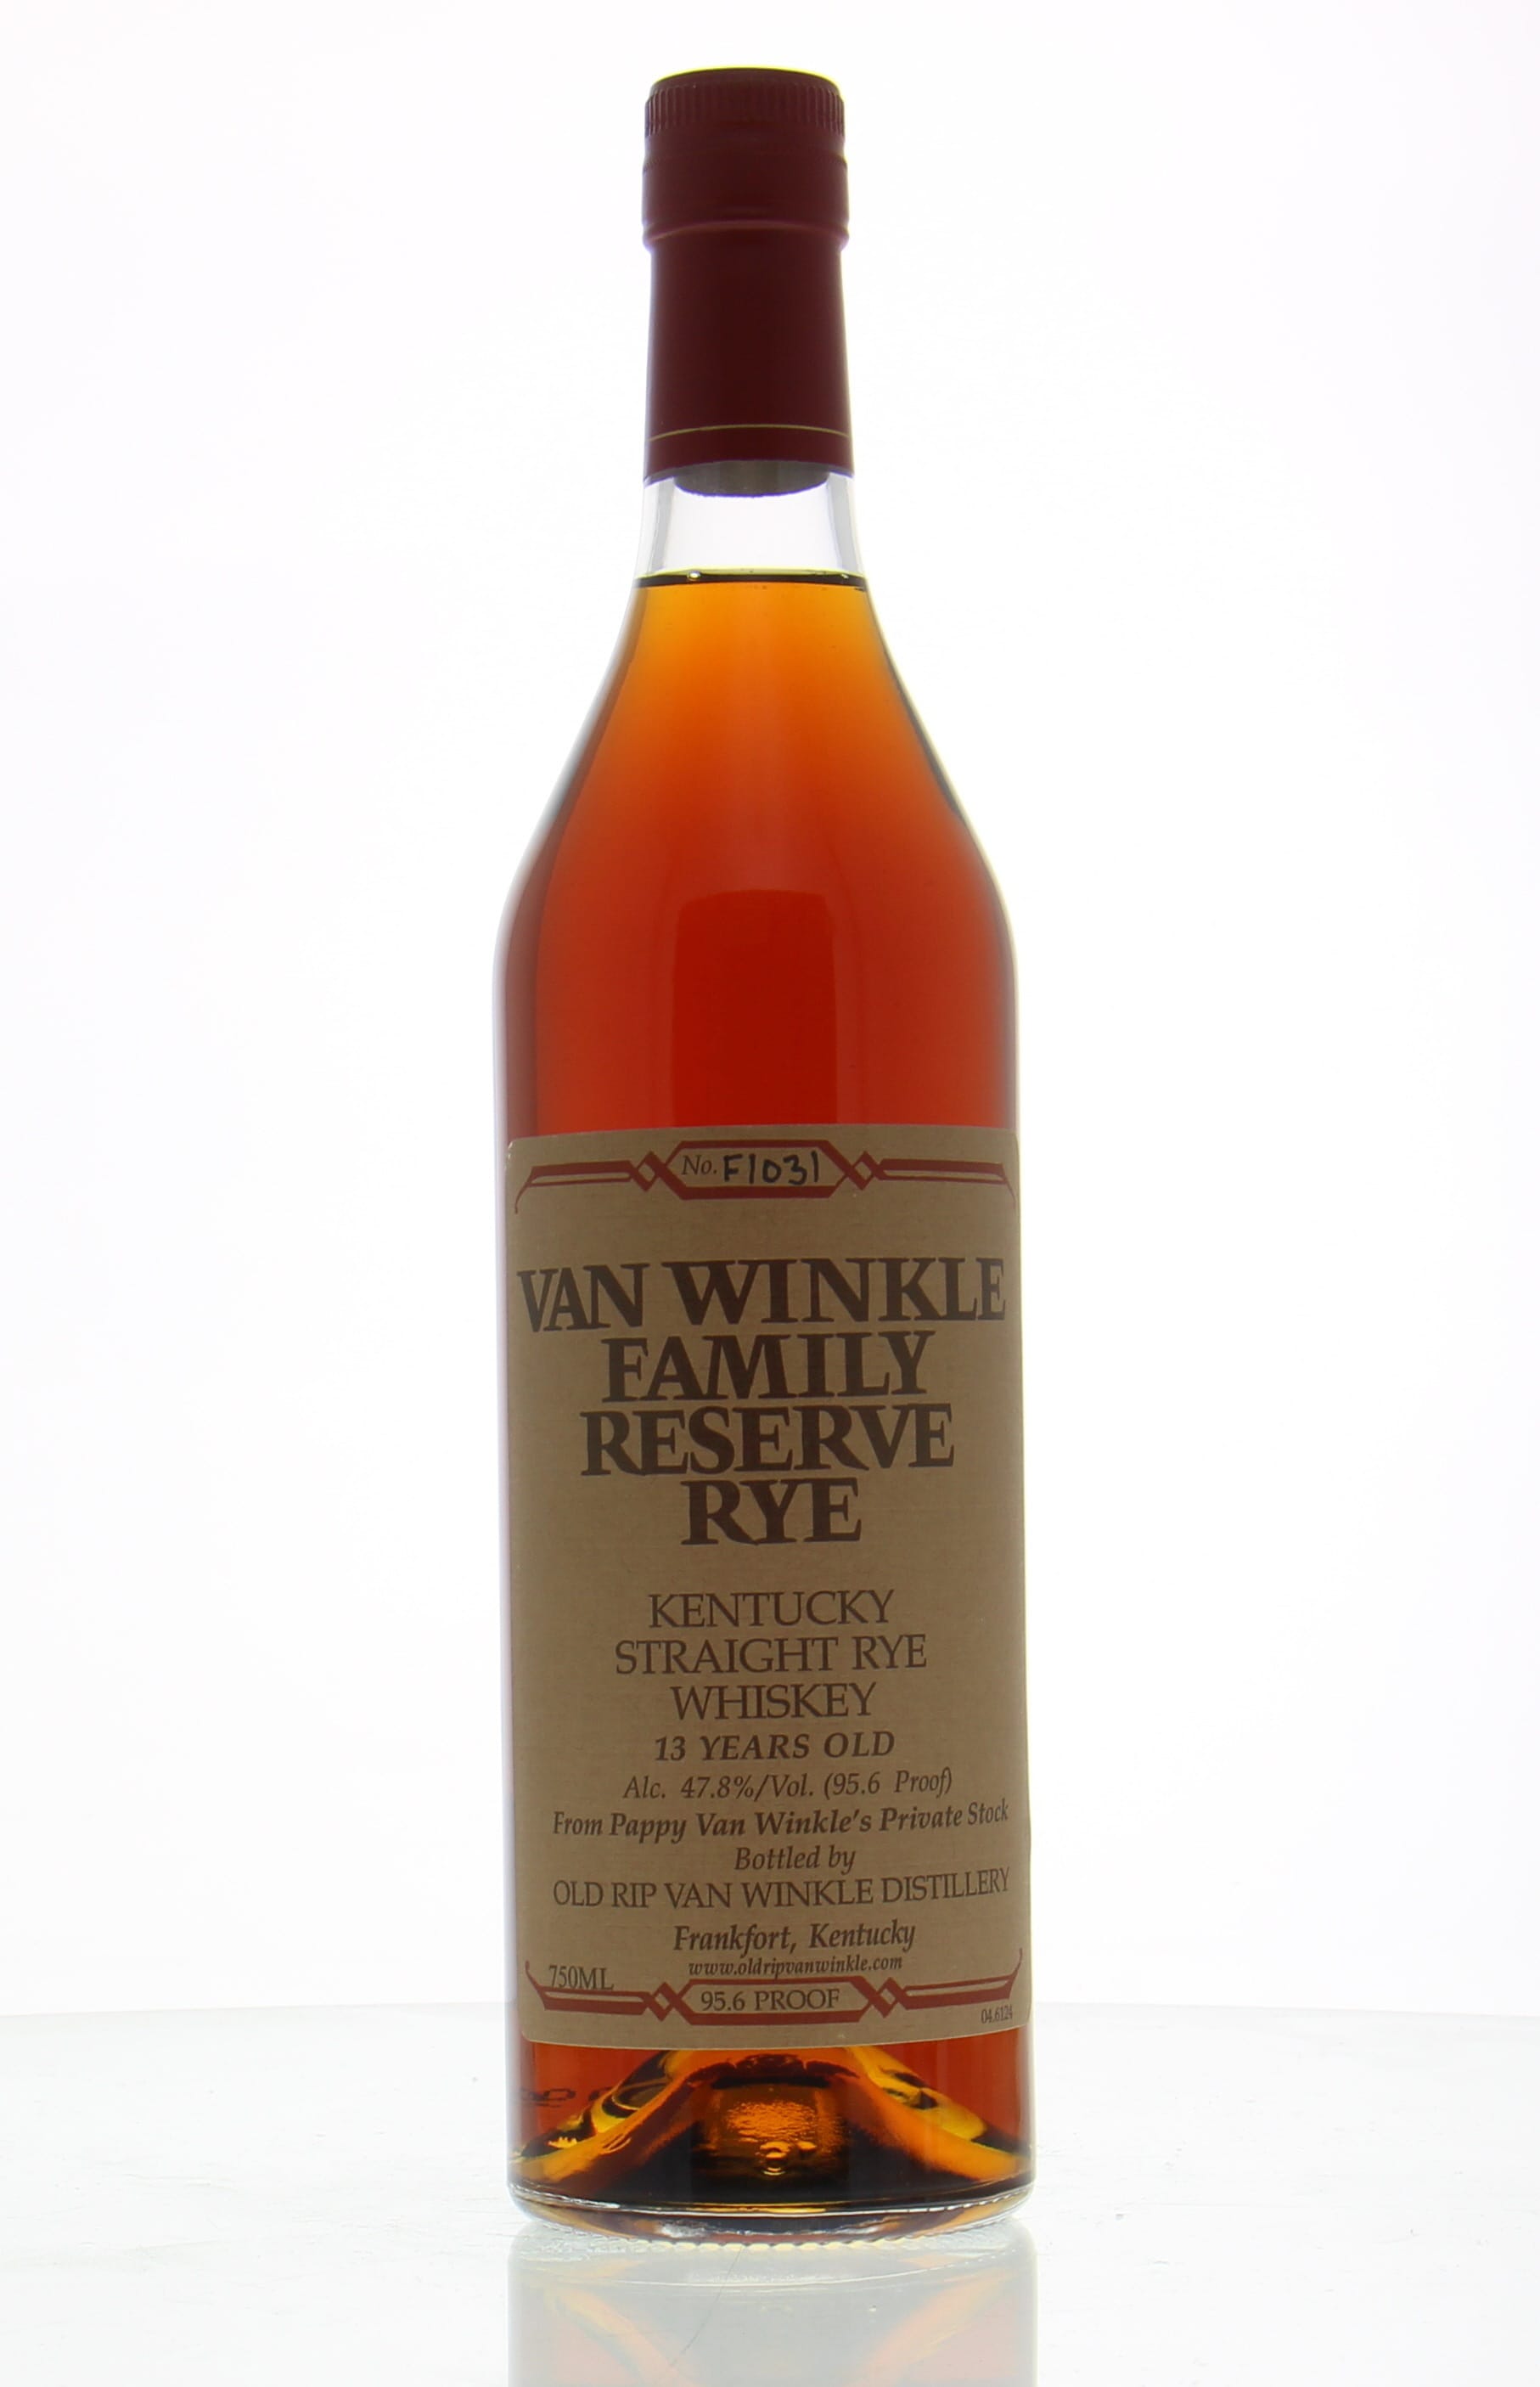 Van Winkle - Rye 13 Years Old Family Reserve No. F1031 95.6 Proof 47.8% NV Perfect